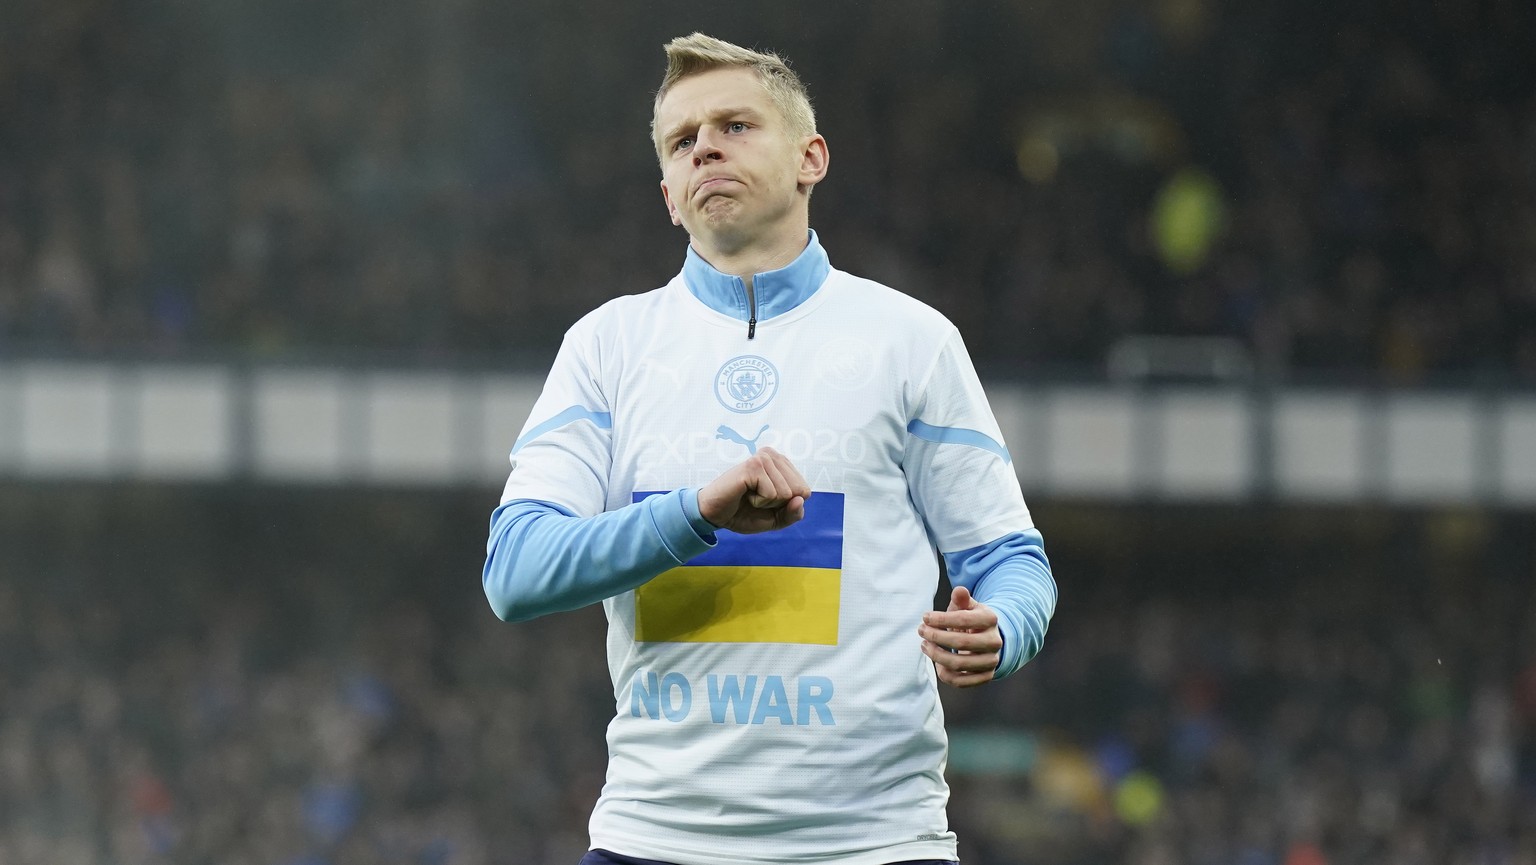 epa09787350 Oleksandr Zinchenko of Manchester City wears a shirt reading &#039;No War&#039; as he warms up for the English Premier League soccer match between Everton FC and Manchester City in Liverpo ...